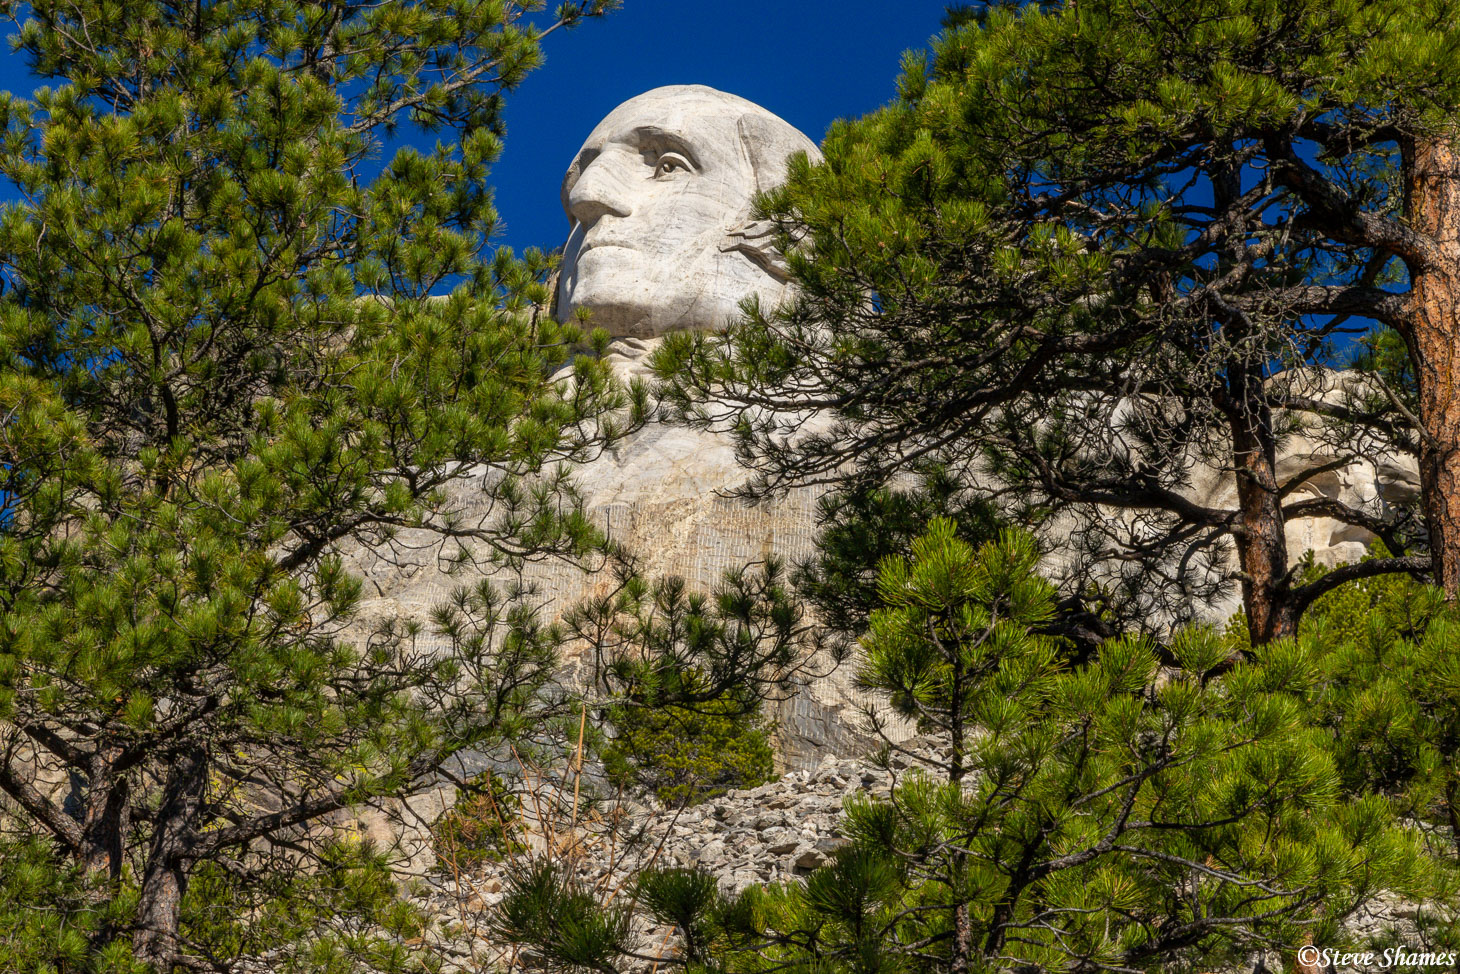 So many billions of pictures have been taken of Mt. Rushmore, so I looked to find the unique angles. Here is Washington through...